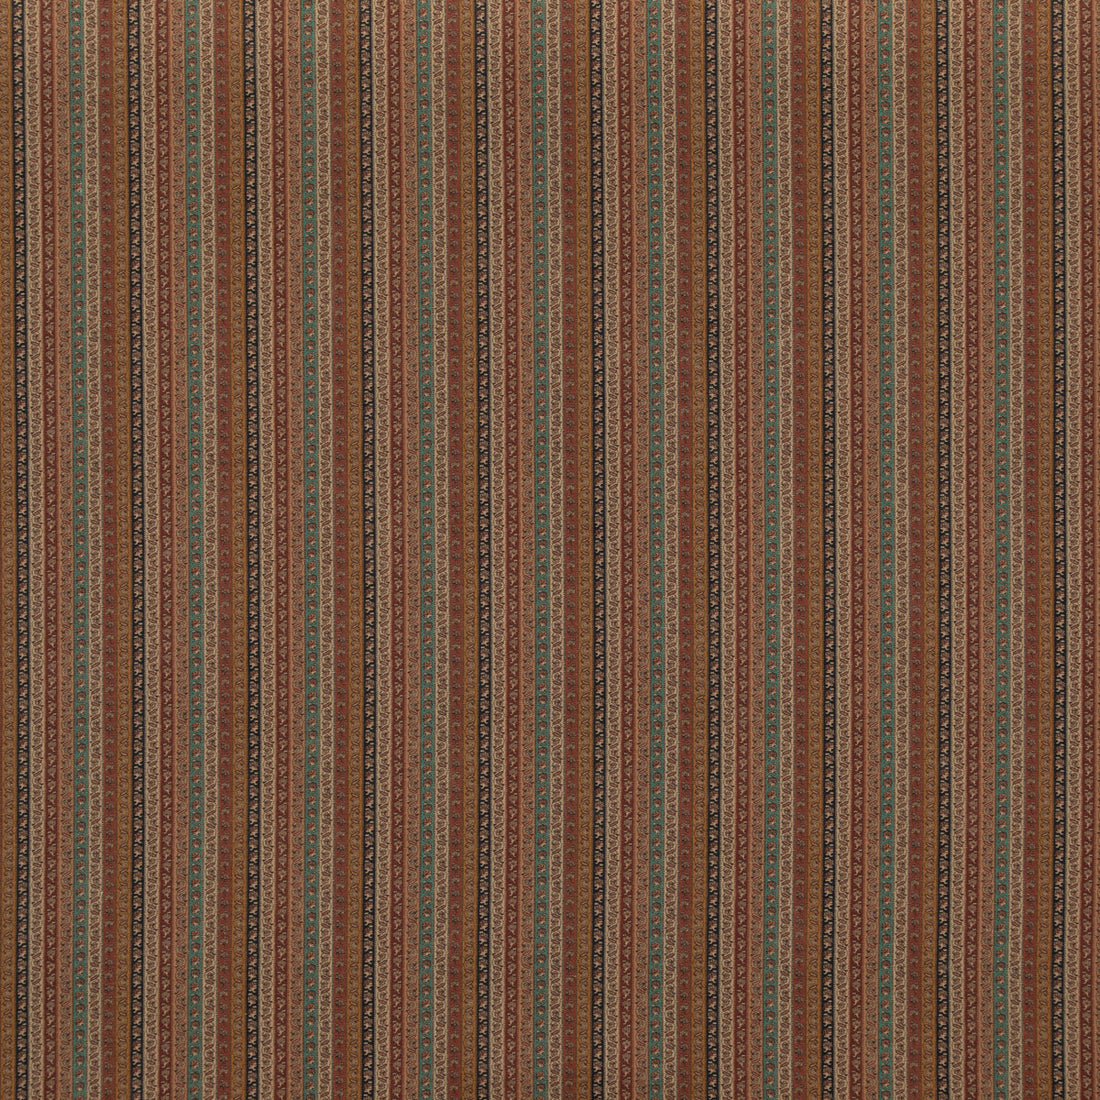 Wilde Stripe fabric in antique color - pattern FD2007.J52.0 - by Mulberry in the Mulberry Long Weekend collection